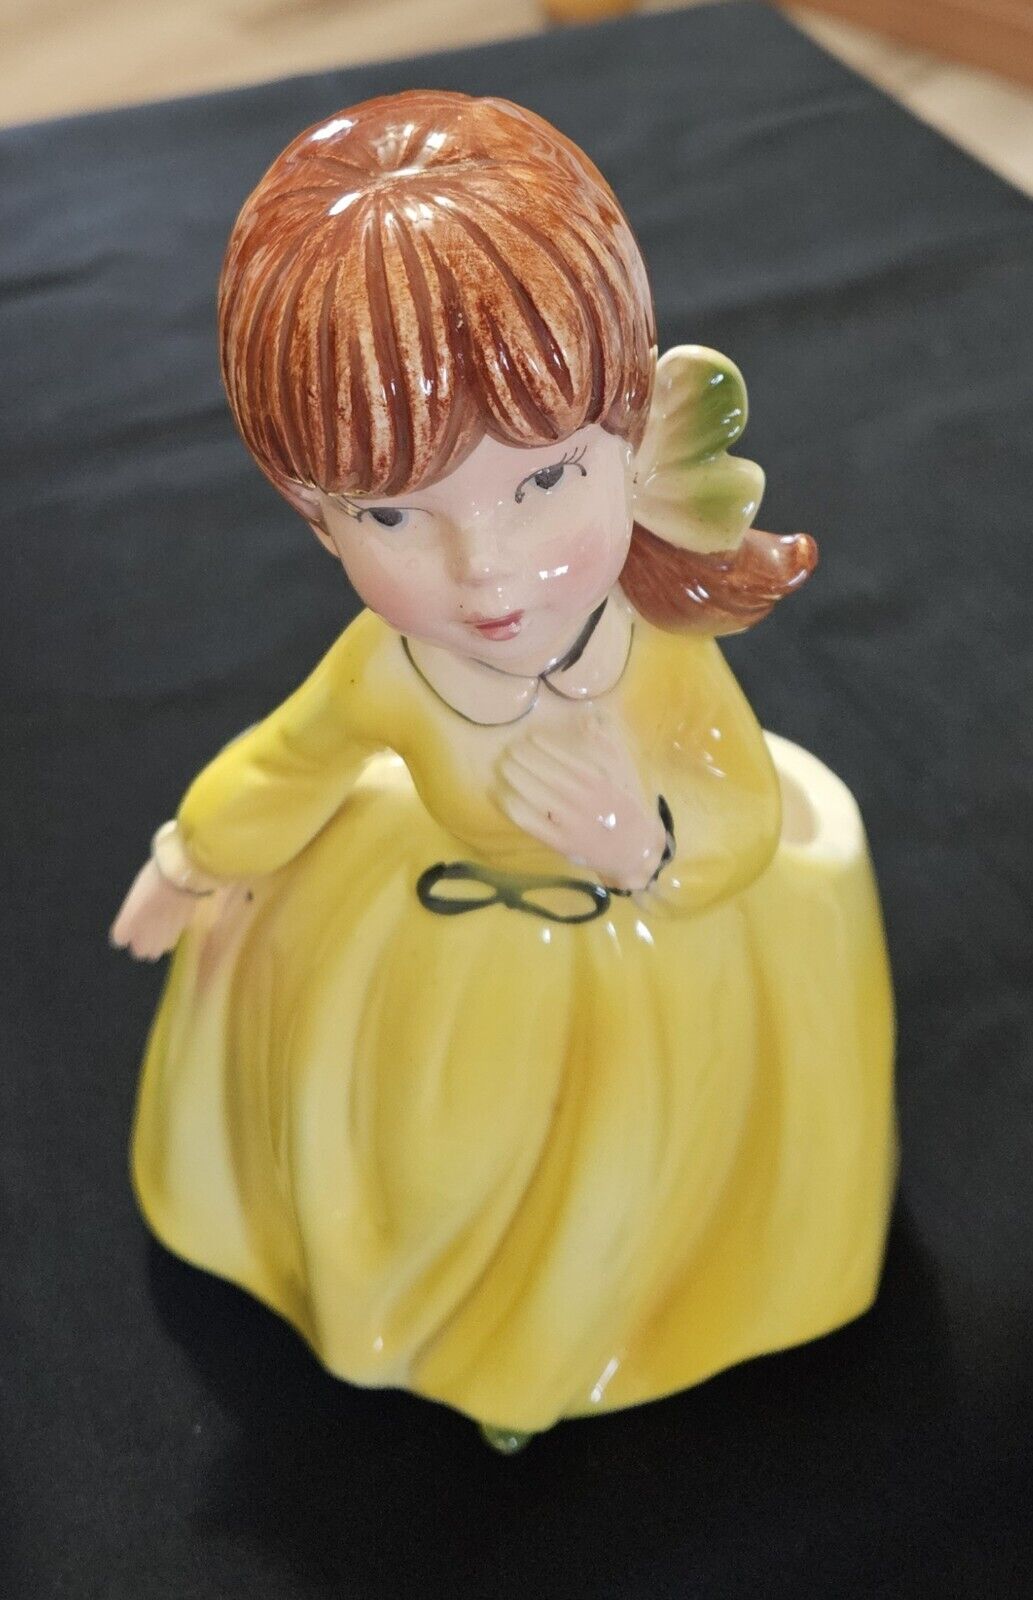 Vintage Inarco Planter E3786 Girl In Yellow Dress